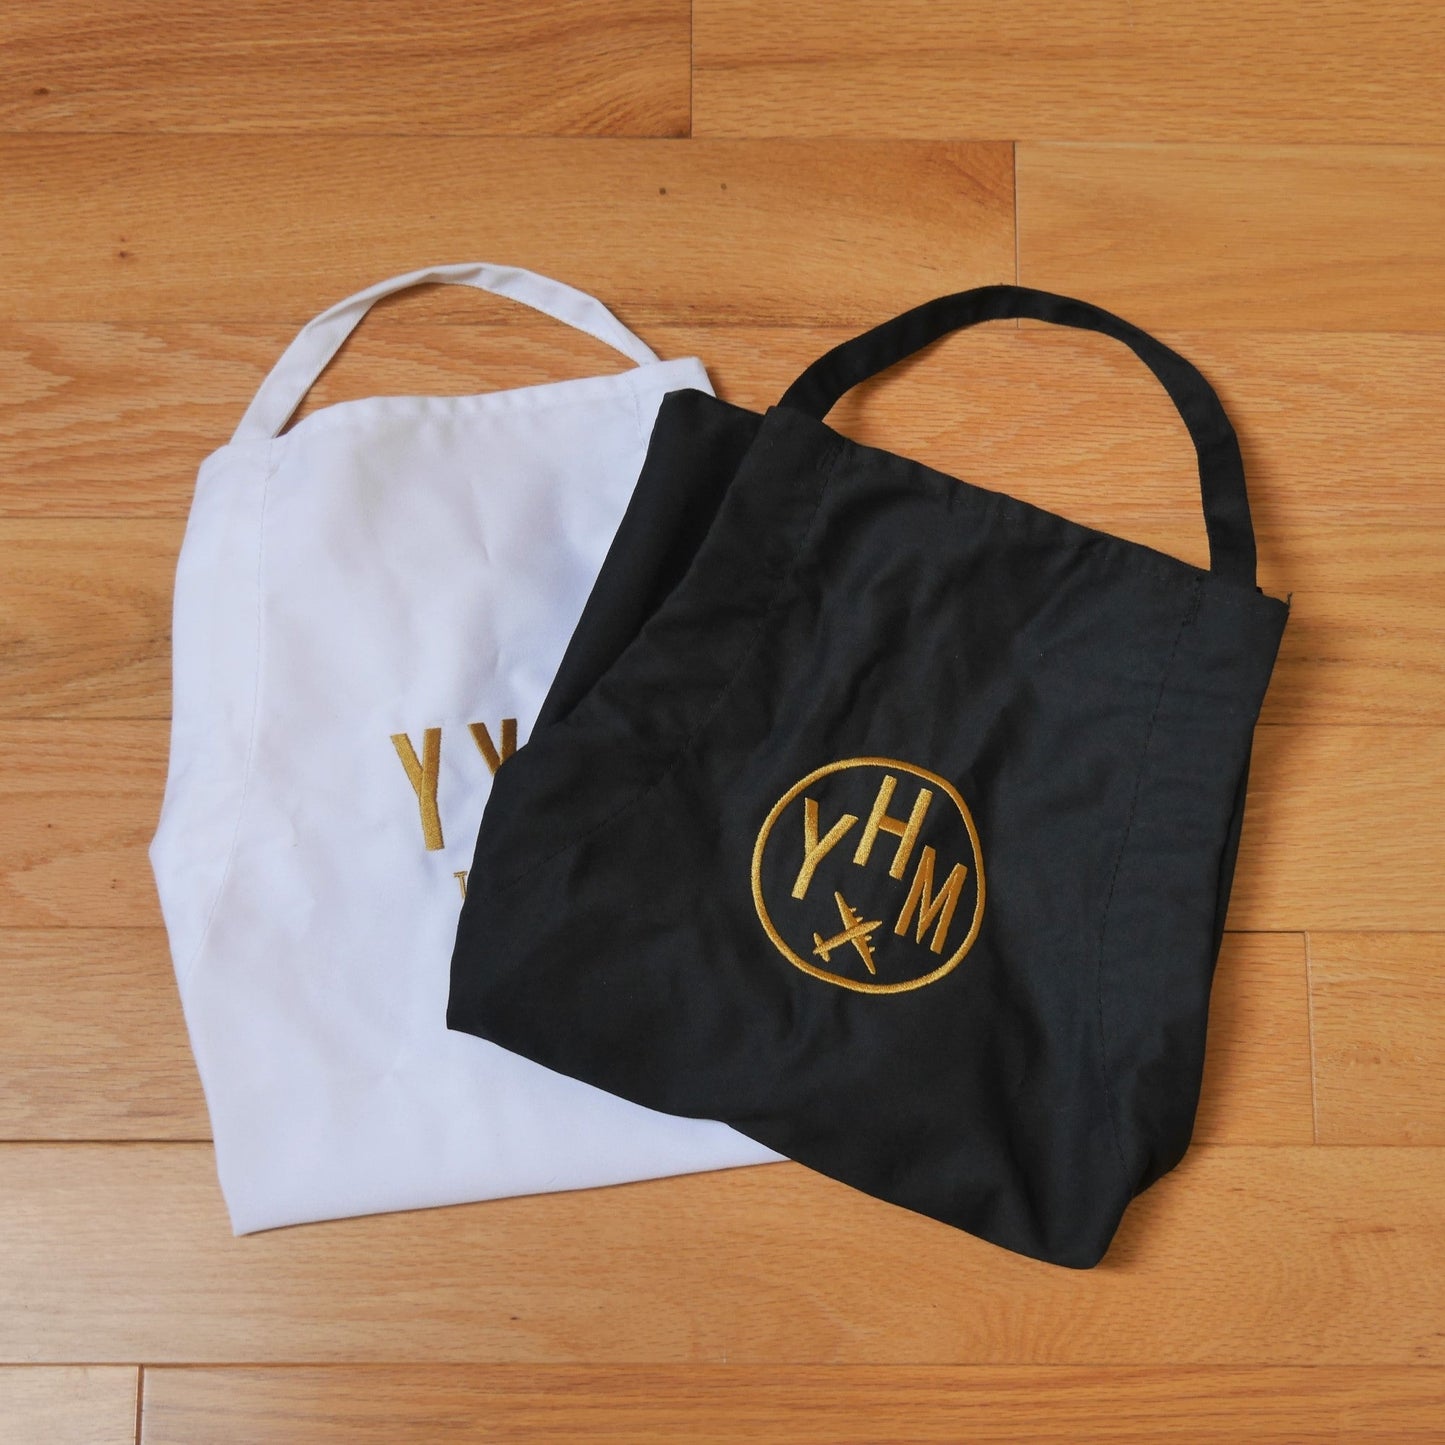 City Embroidered Apron - Old Gold • BWI Baltimore • YHM Designs - Image 14